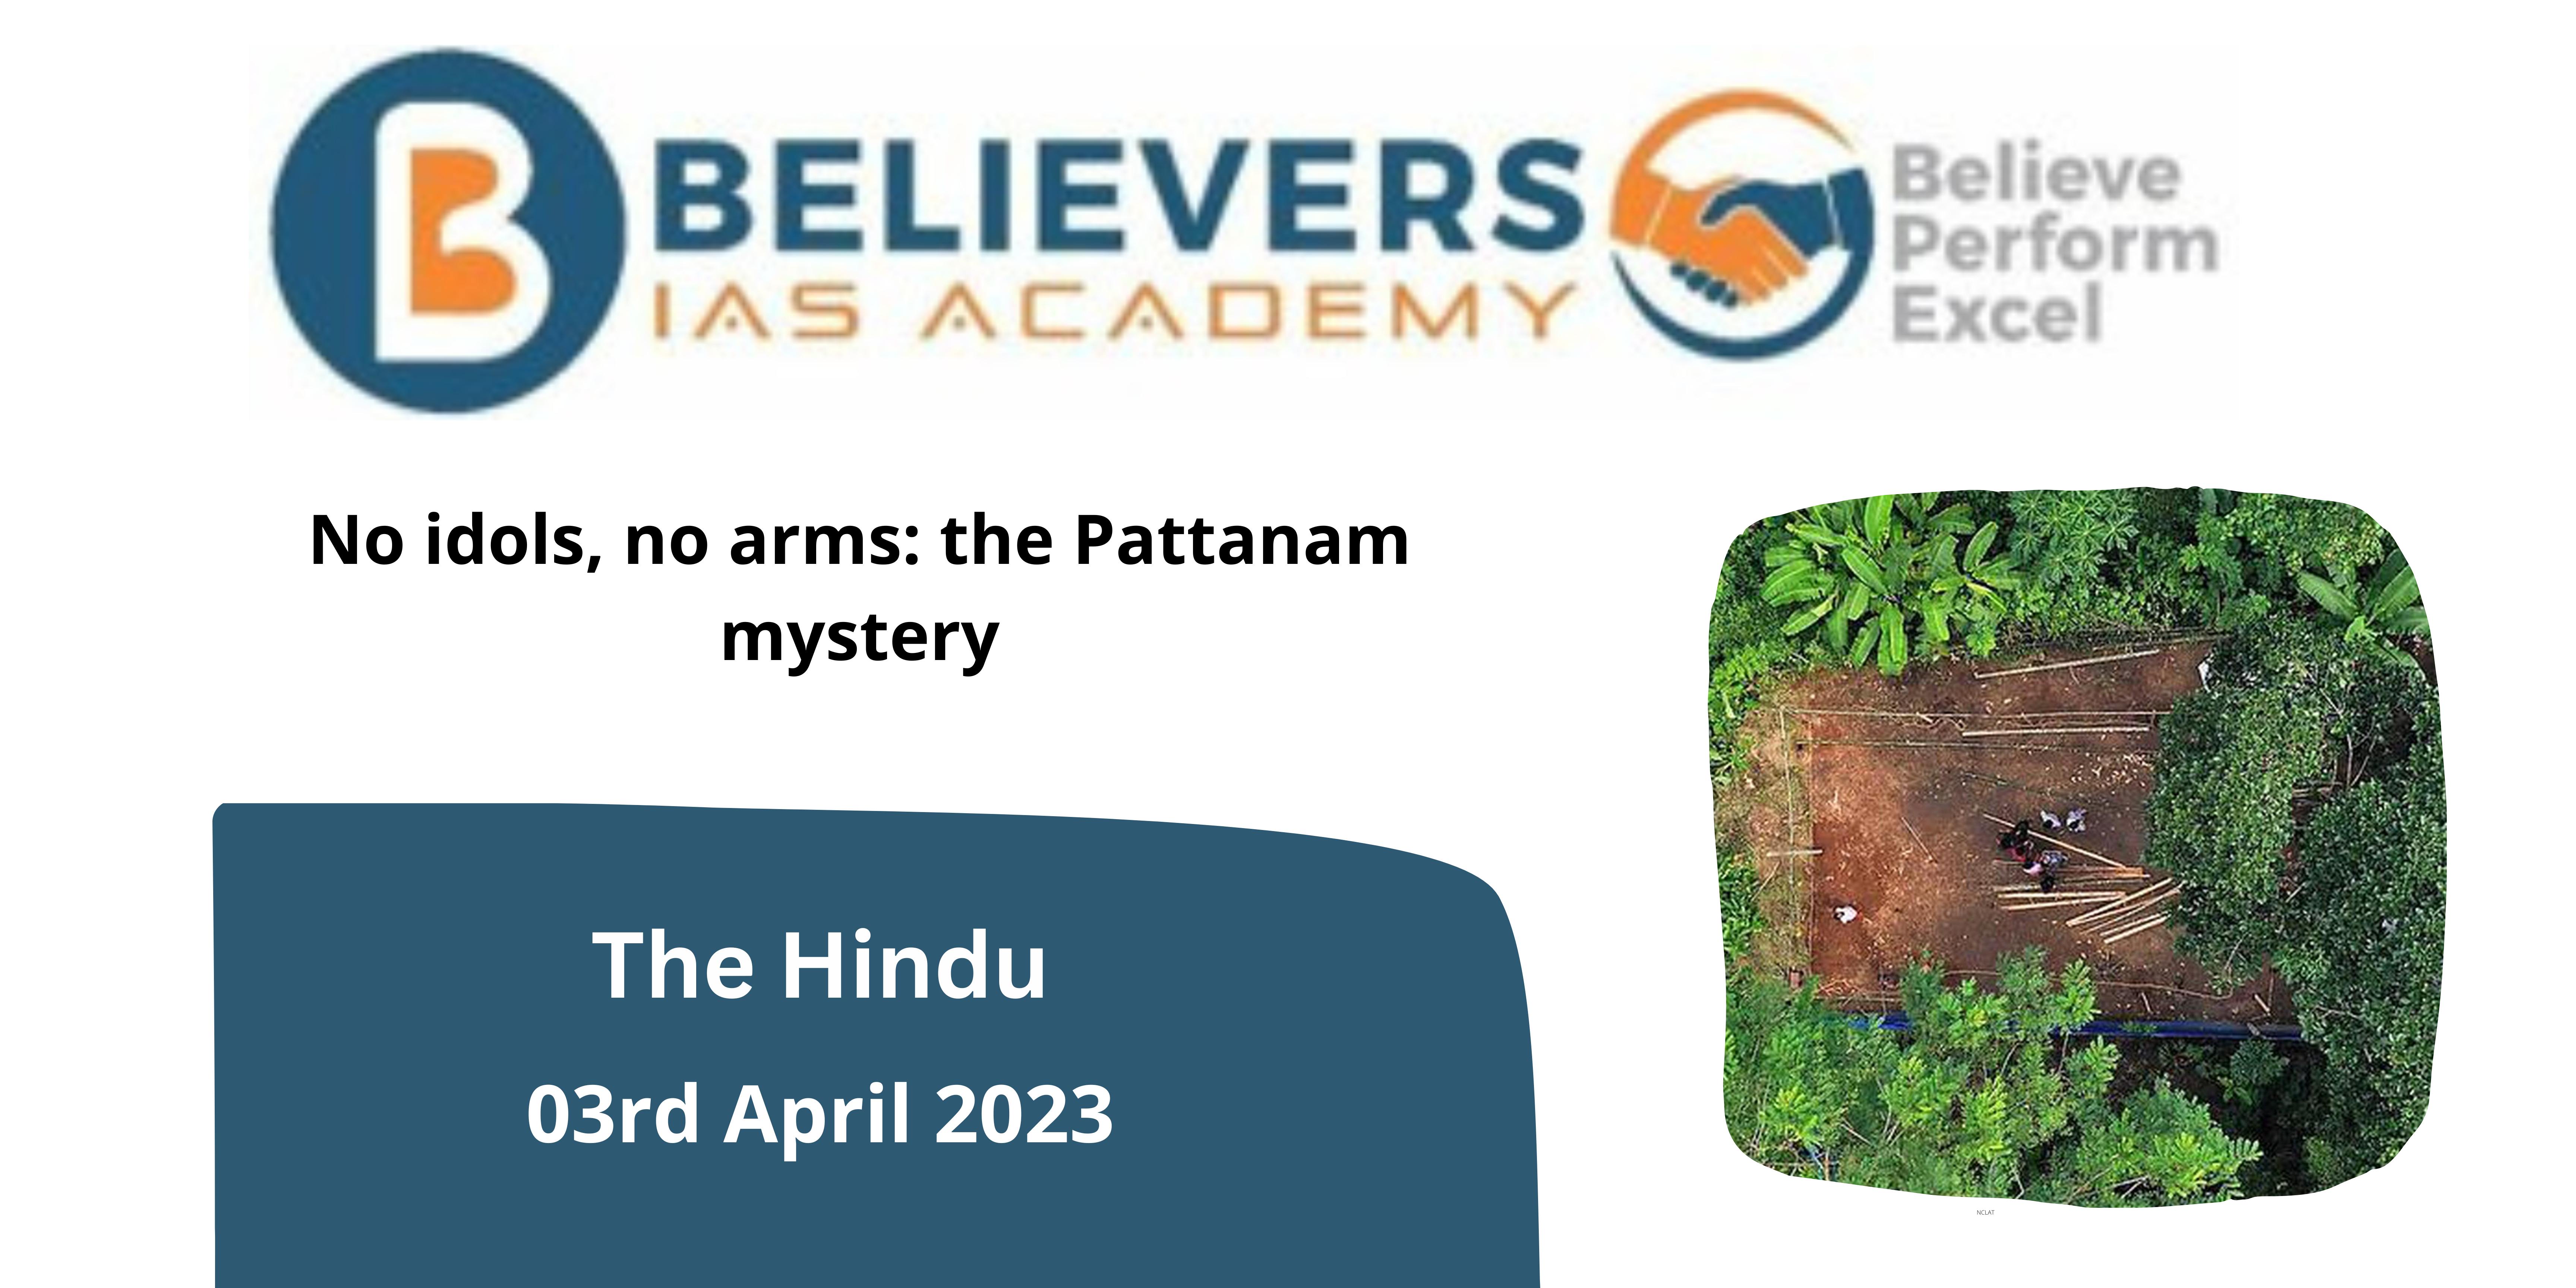 No idols, no arms: the Pattanam mystery